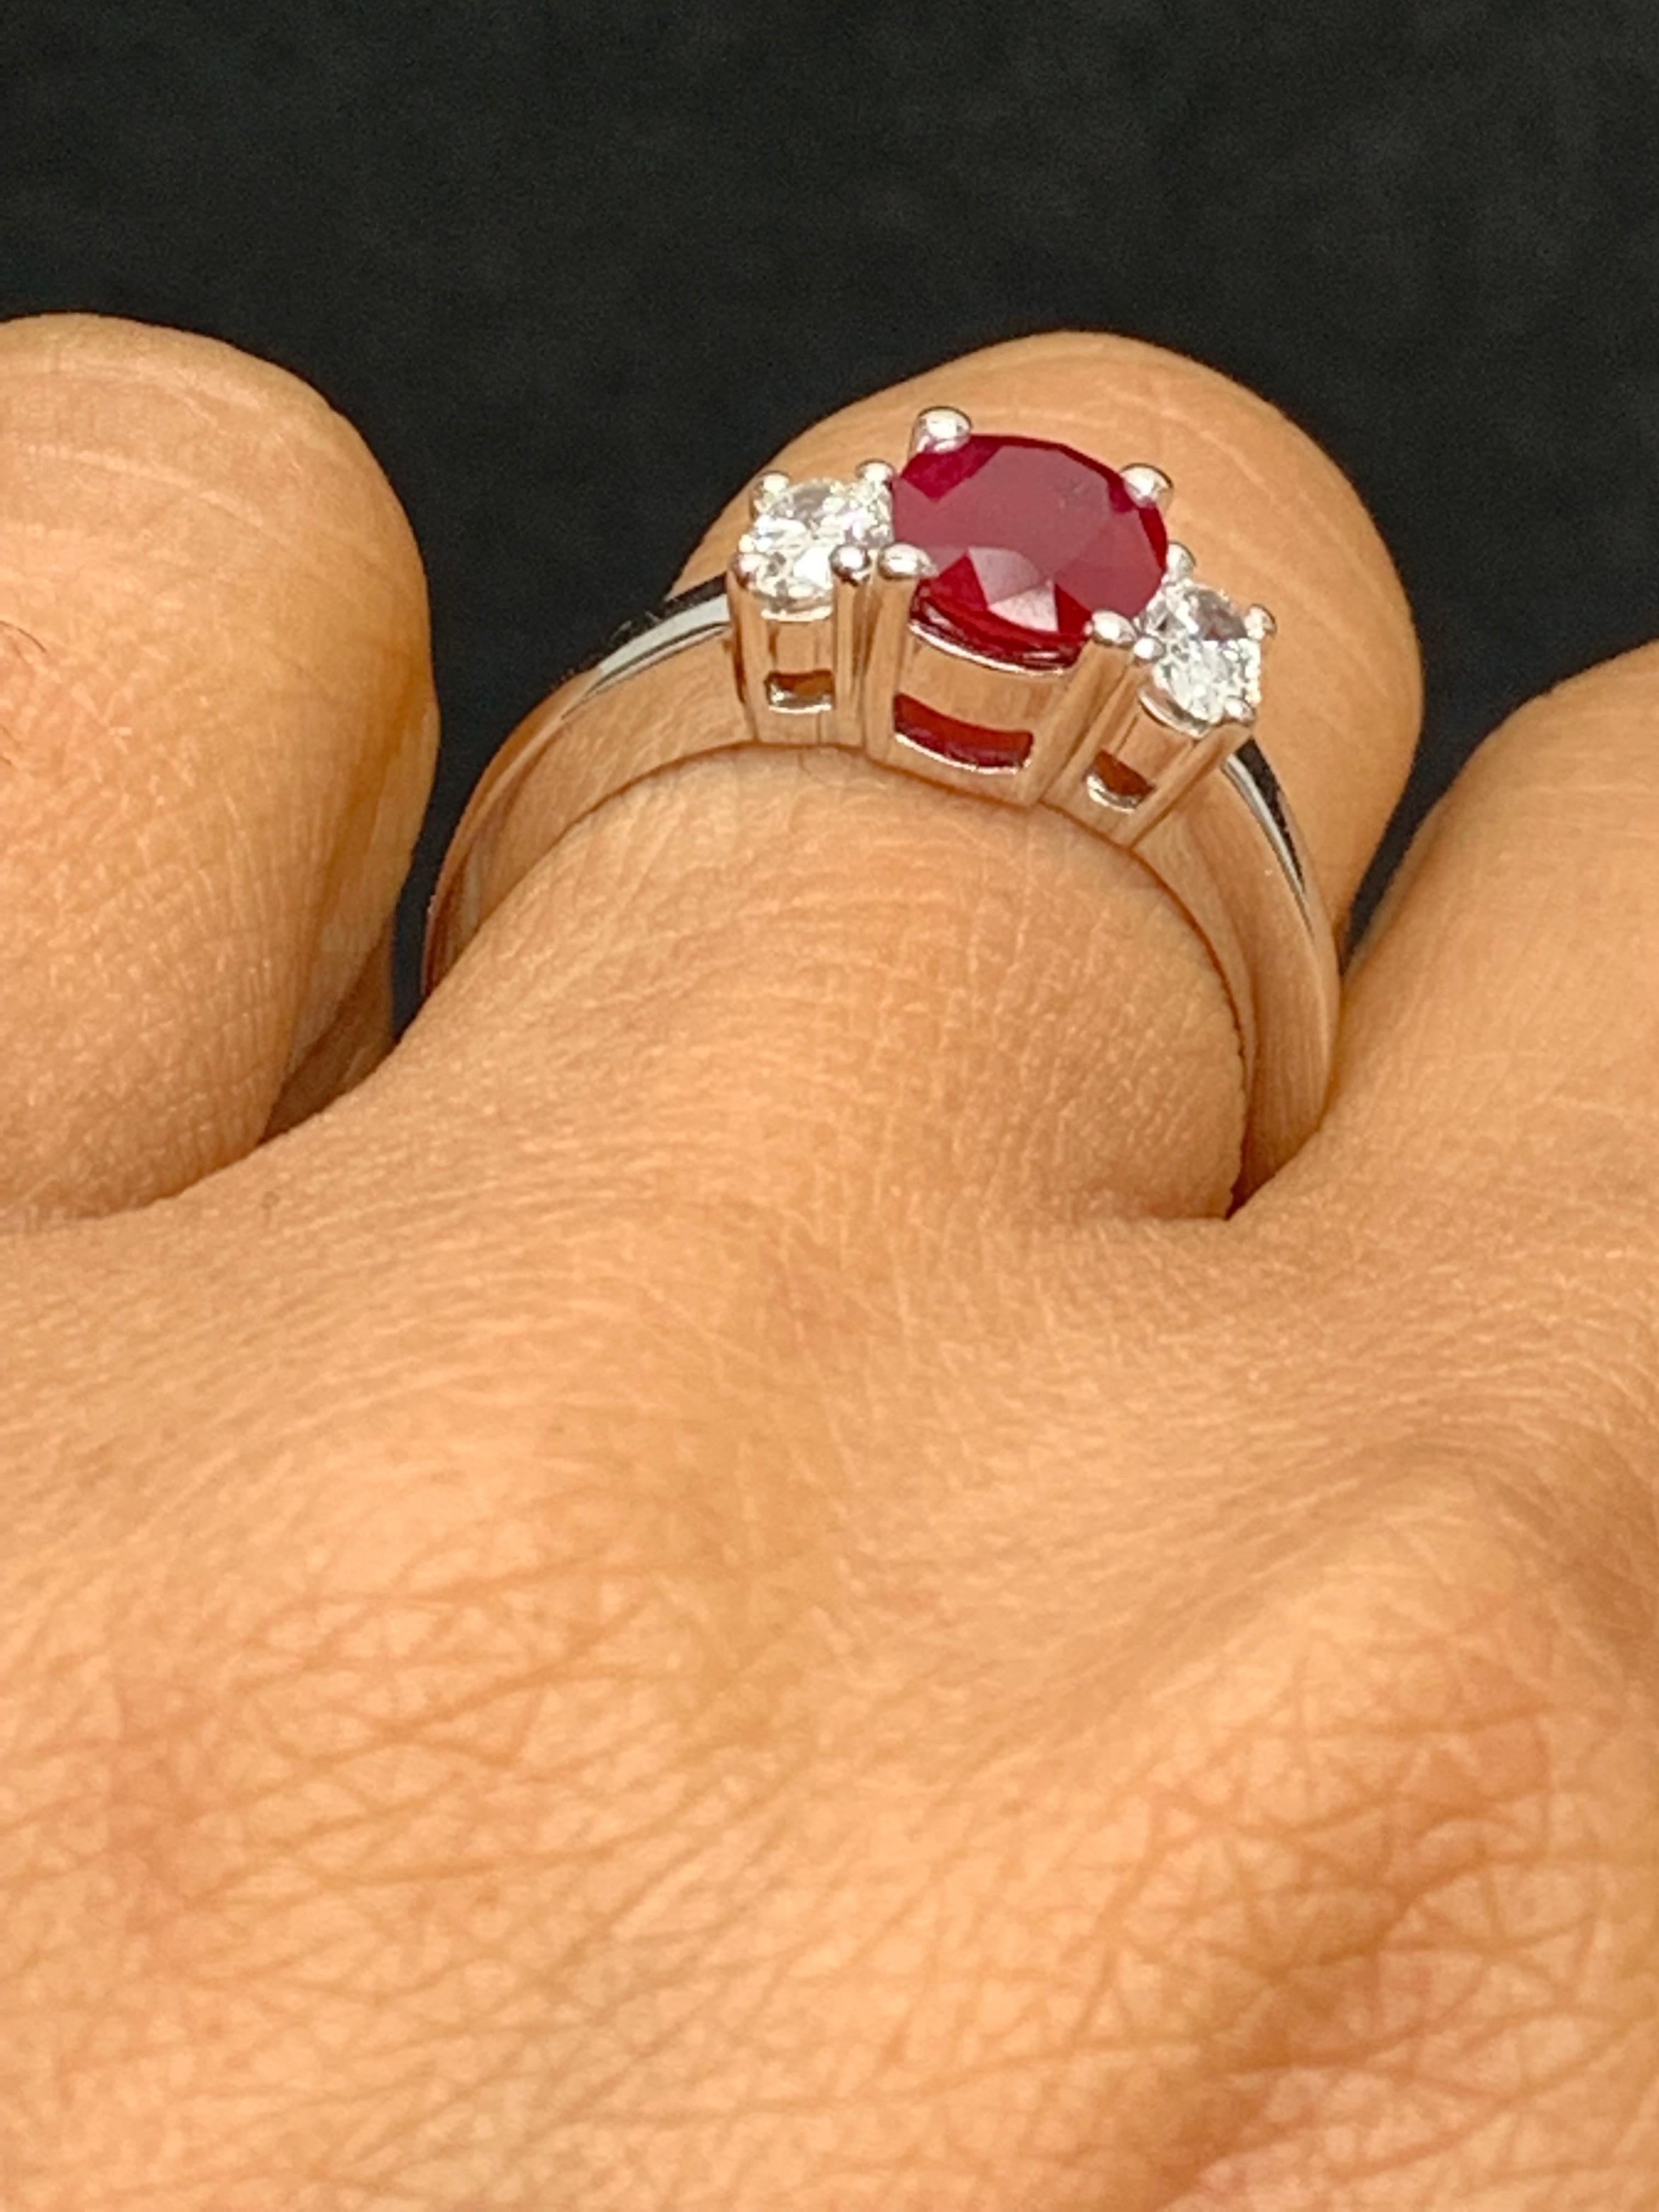 1.15 Carat Oval Cut Ruby & Diamond 3 Stone Engagement Ring in 18k White Gold For Sale 1